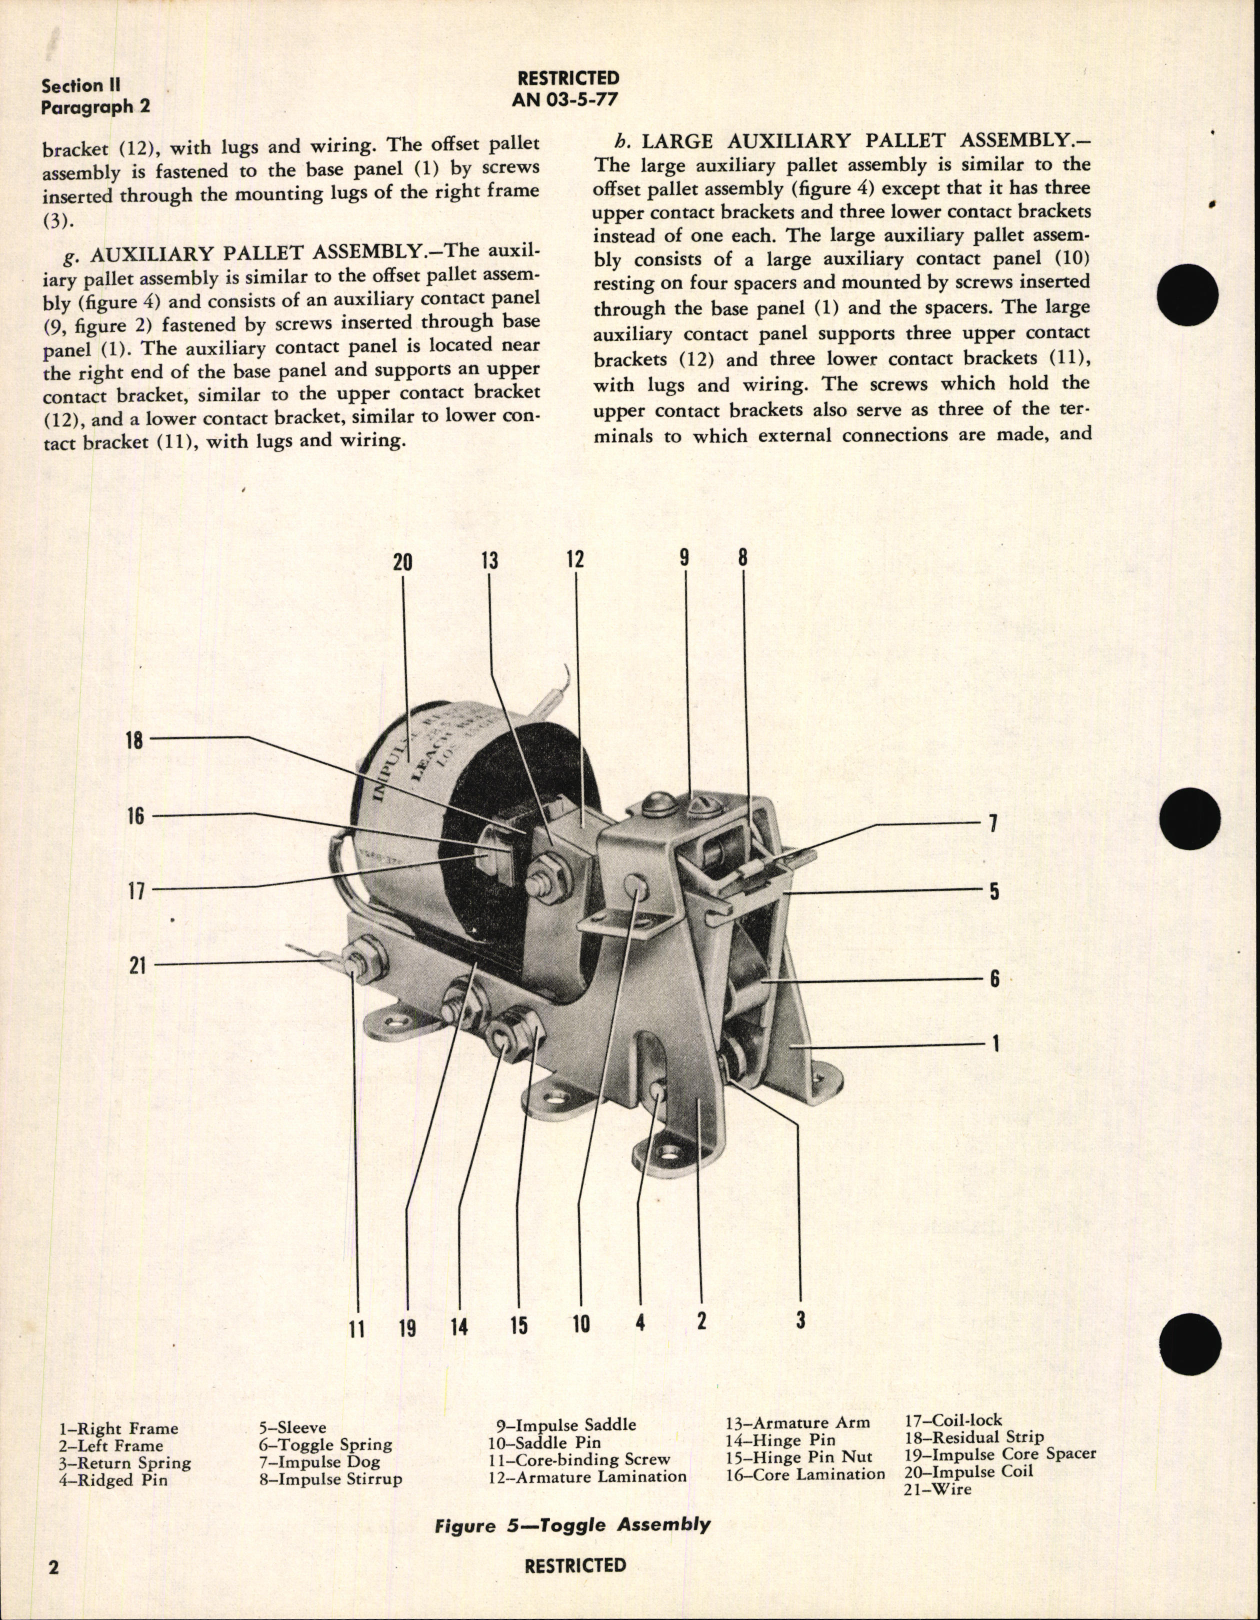 Sample page 8 from AirCorps Library document: Overhaul Instructions with Parts Catalog for Inverter Relay A-957-7220-A